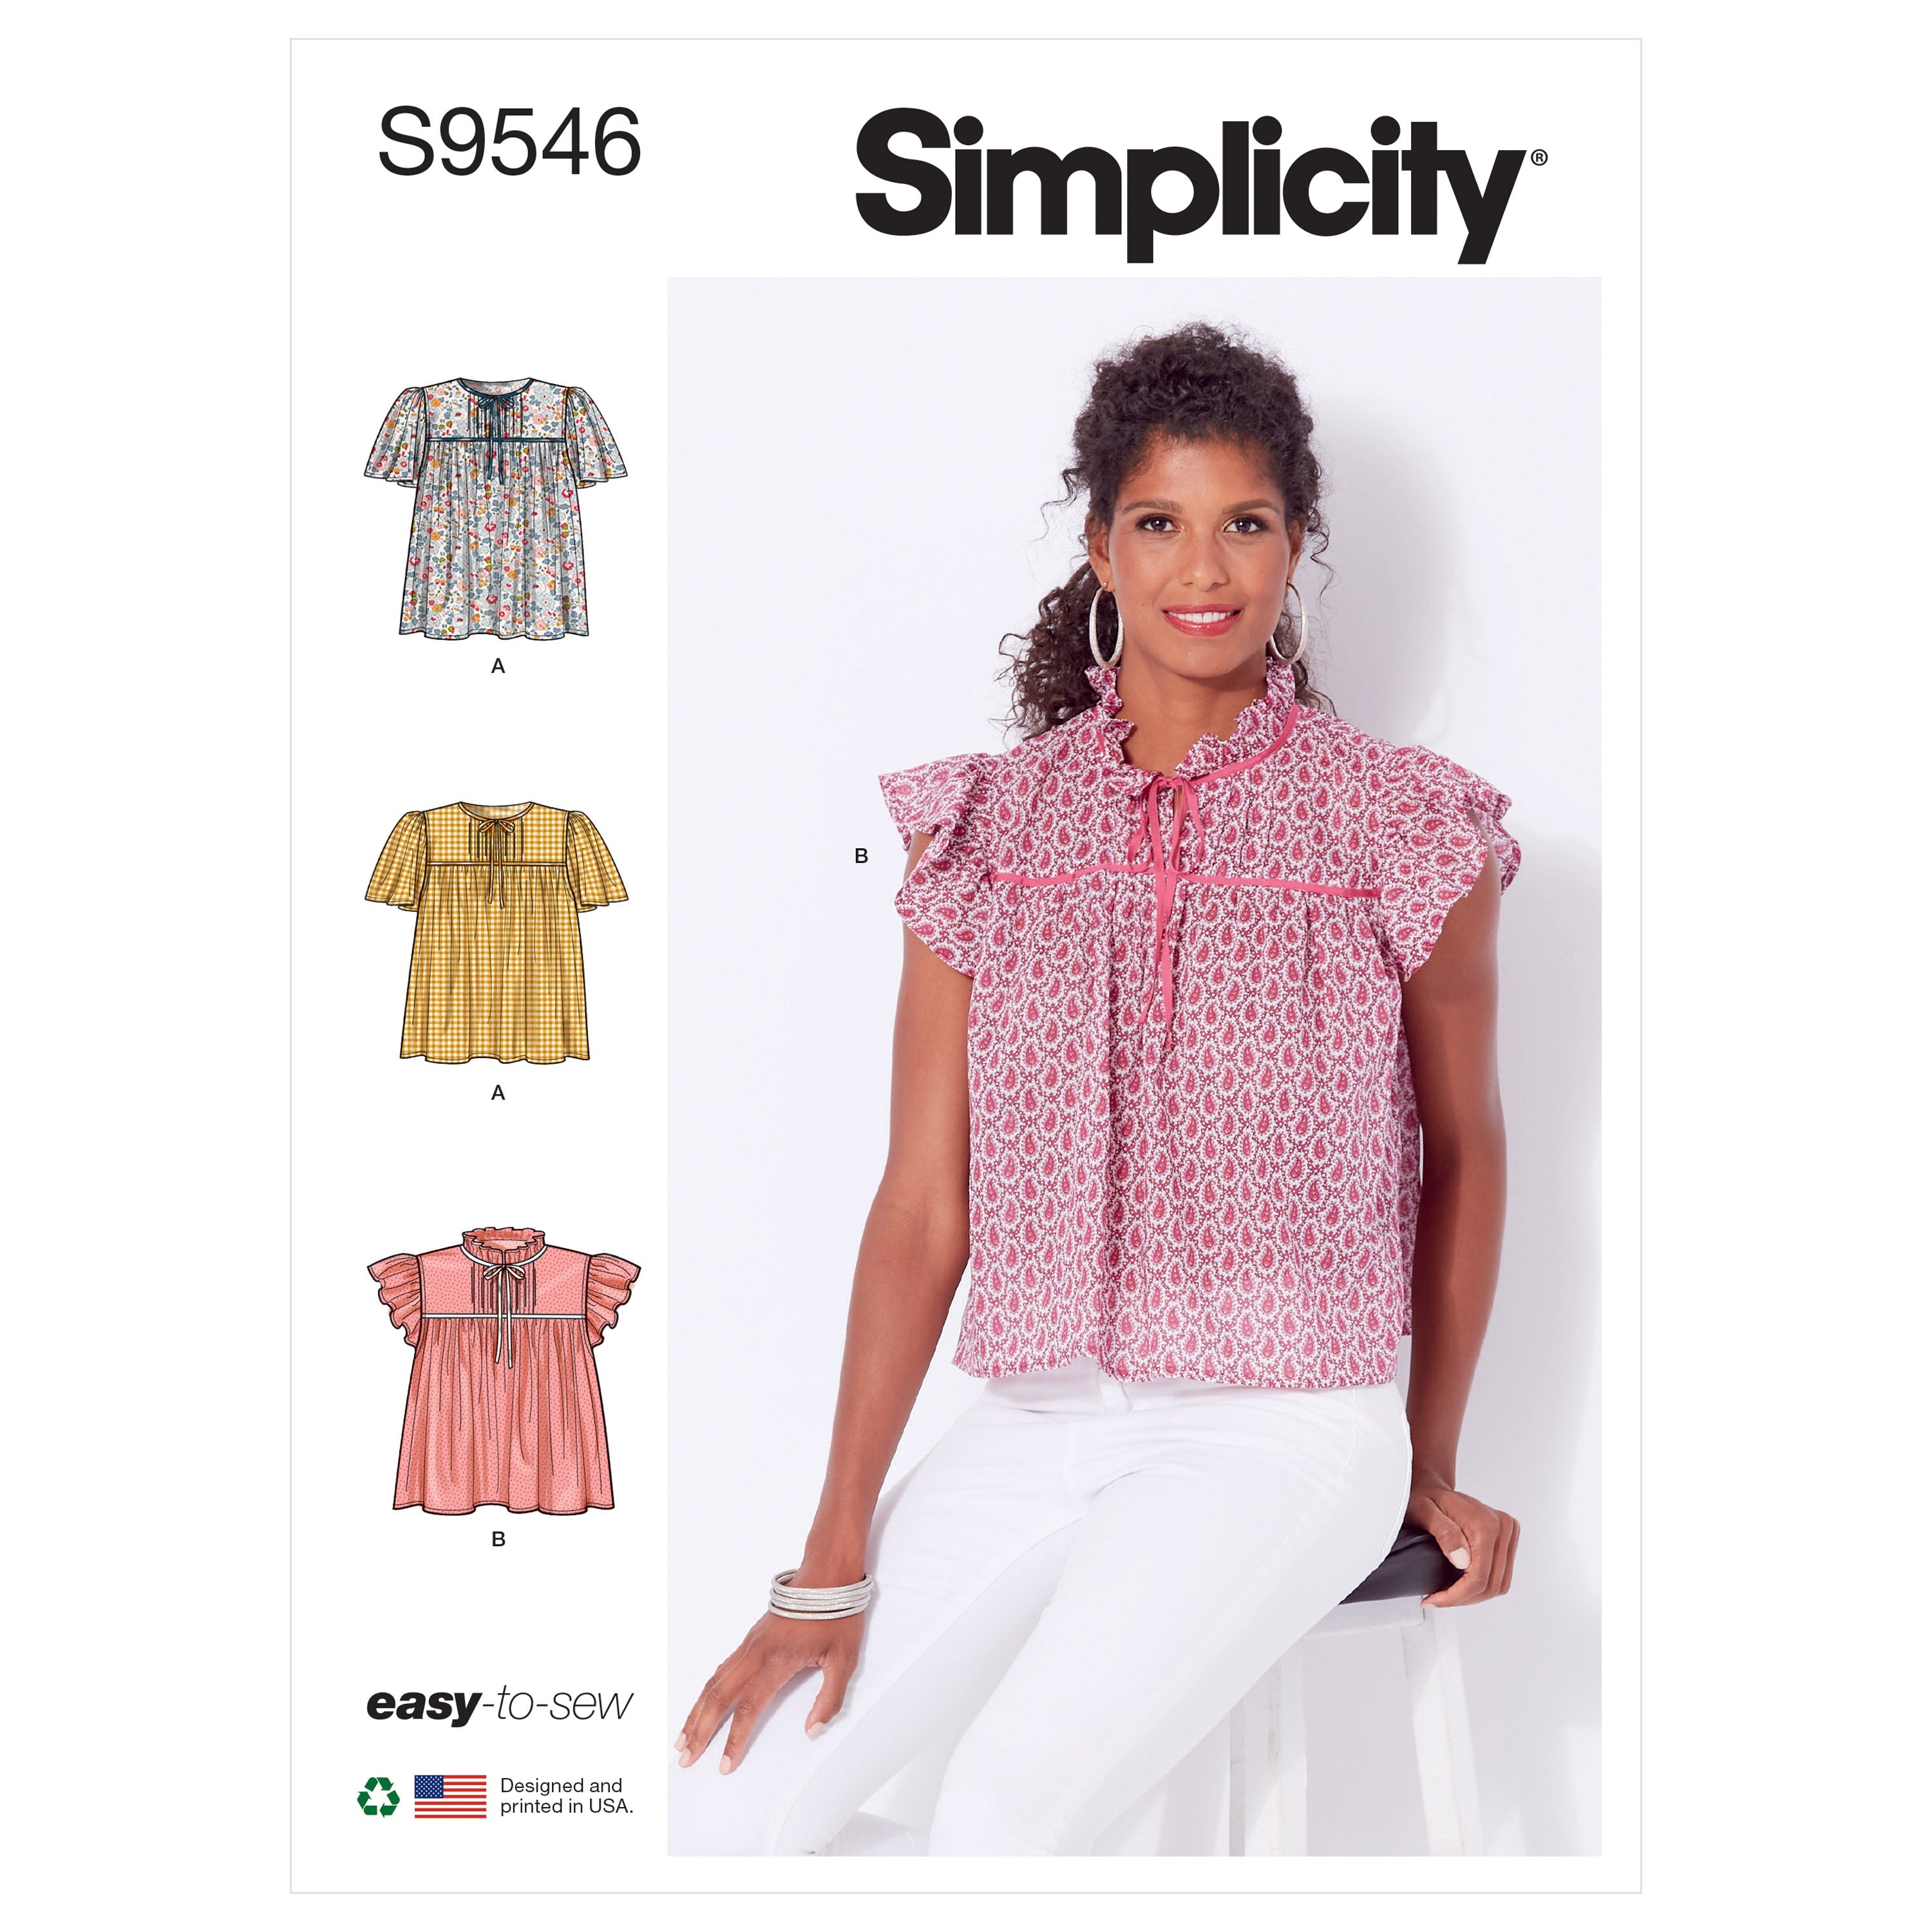 Simplicity 9546 Misses' Tops pattern from Jaycotts Sewing Supplies